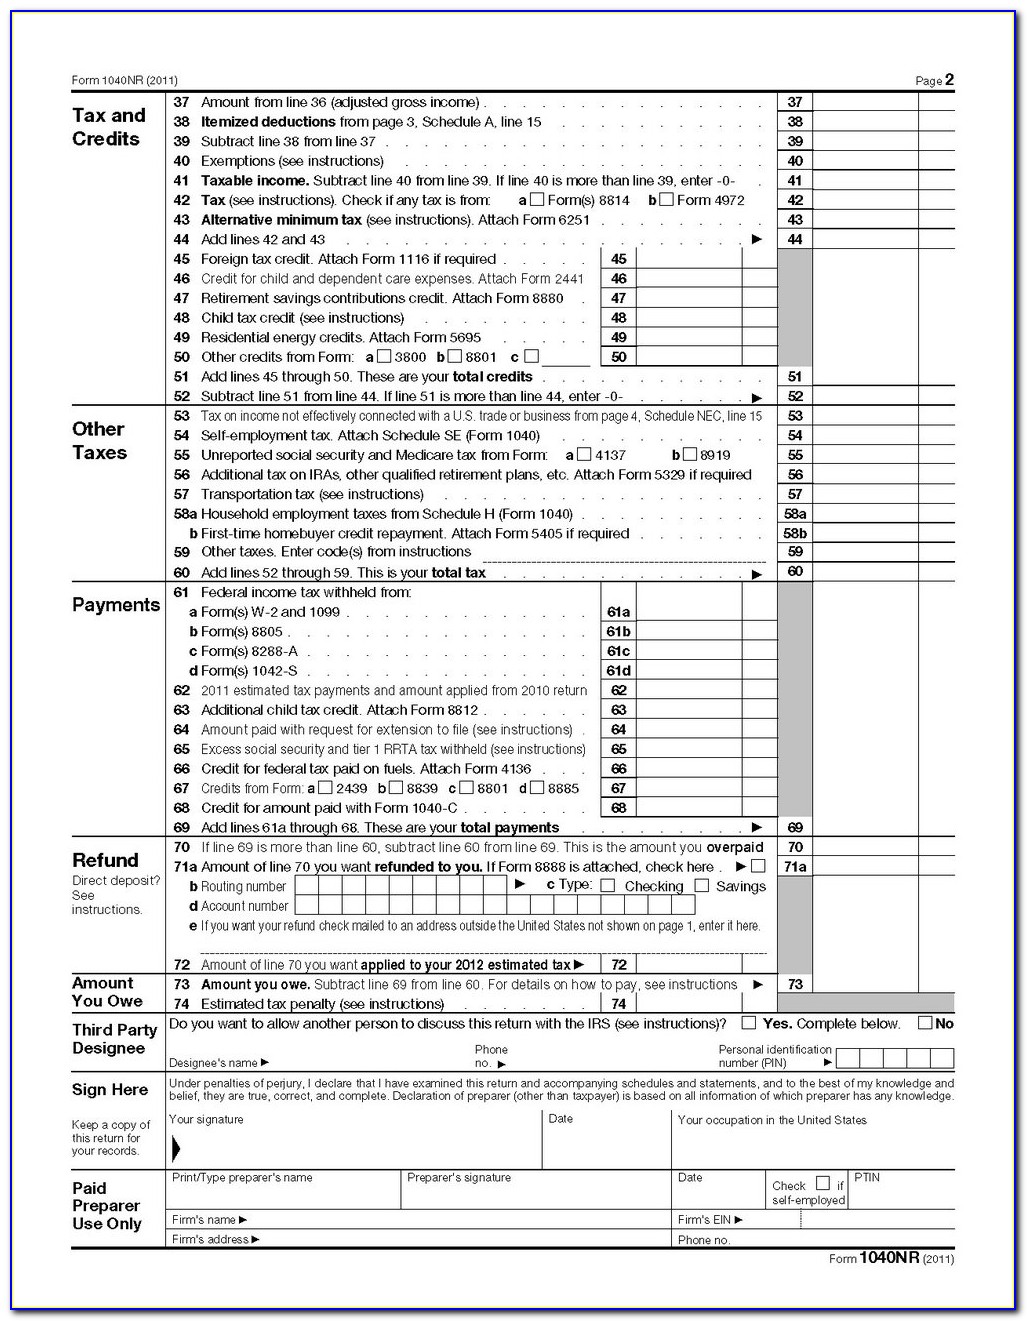 2017 Fed Tax Forms 1040